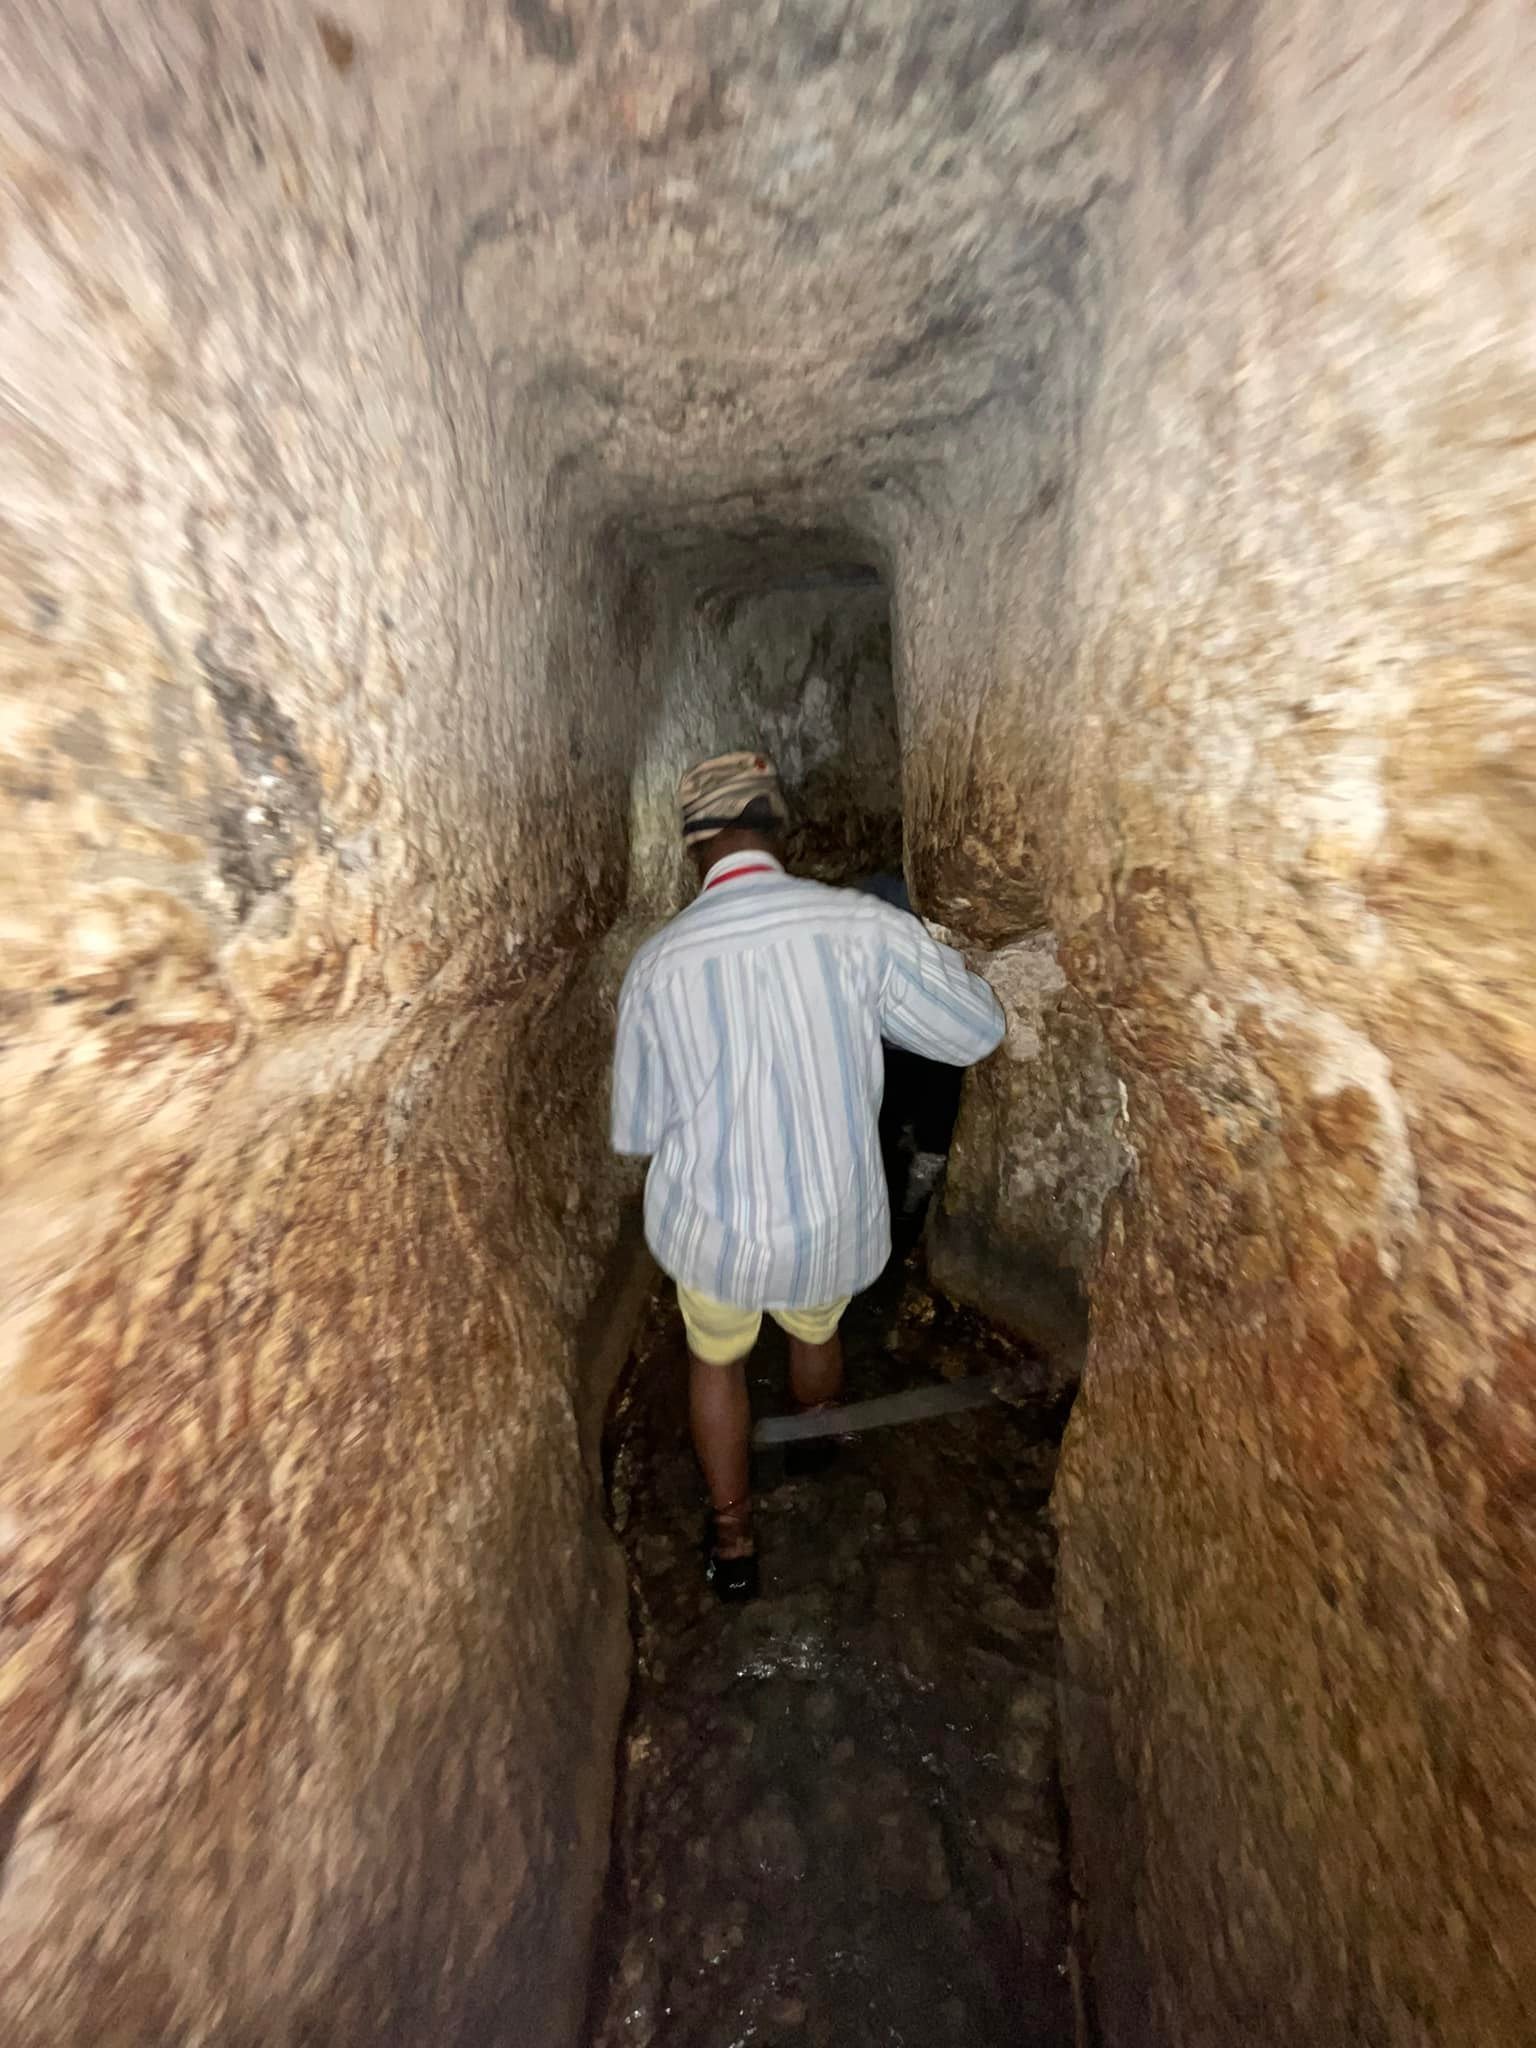  Now we are in it! The water was initially up to about my mid thigh, but quickly settled down to just ankle deep. However the tunnel is 500 yards long. It gets pretty low in some places and pretty narrow and others. Adding to the adventure, we had do